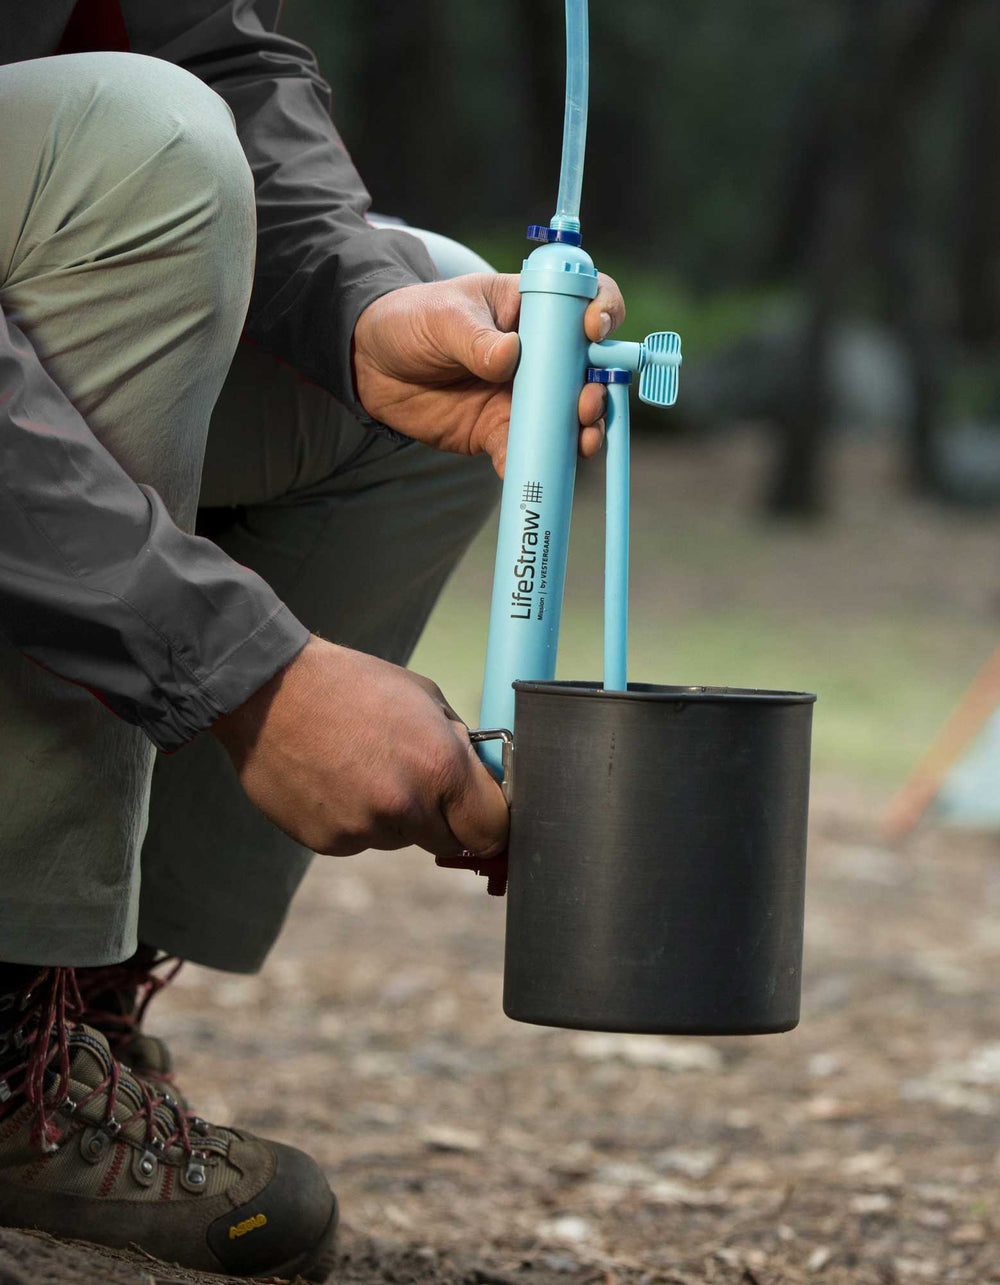 Portable Water Filter Straw - LifeStraw - Free Shipping